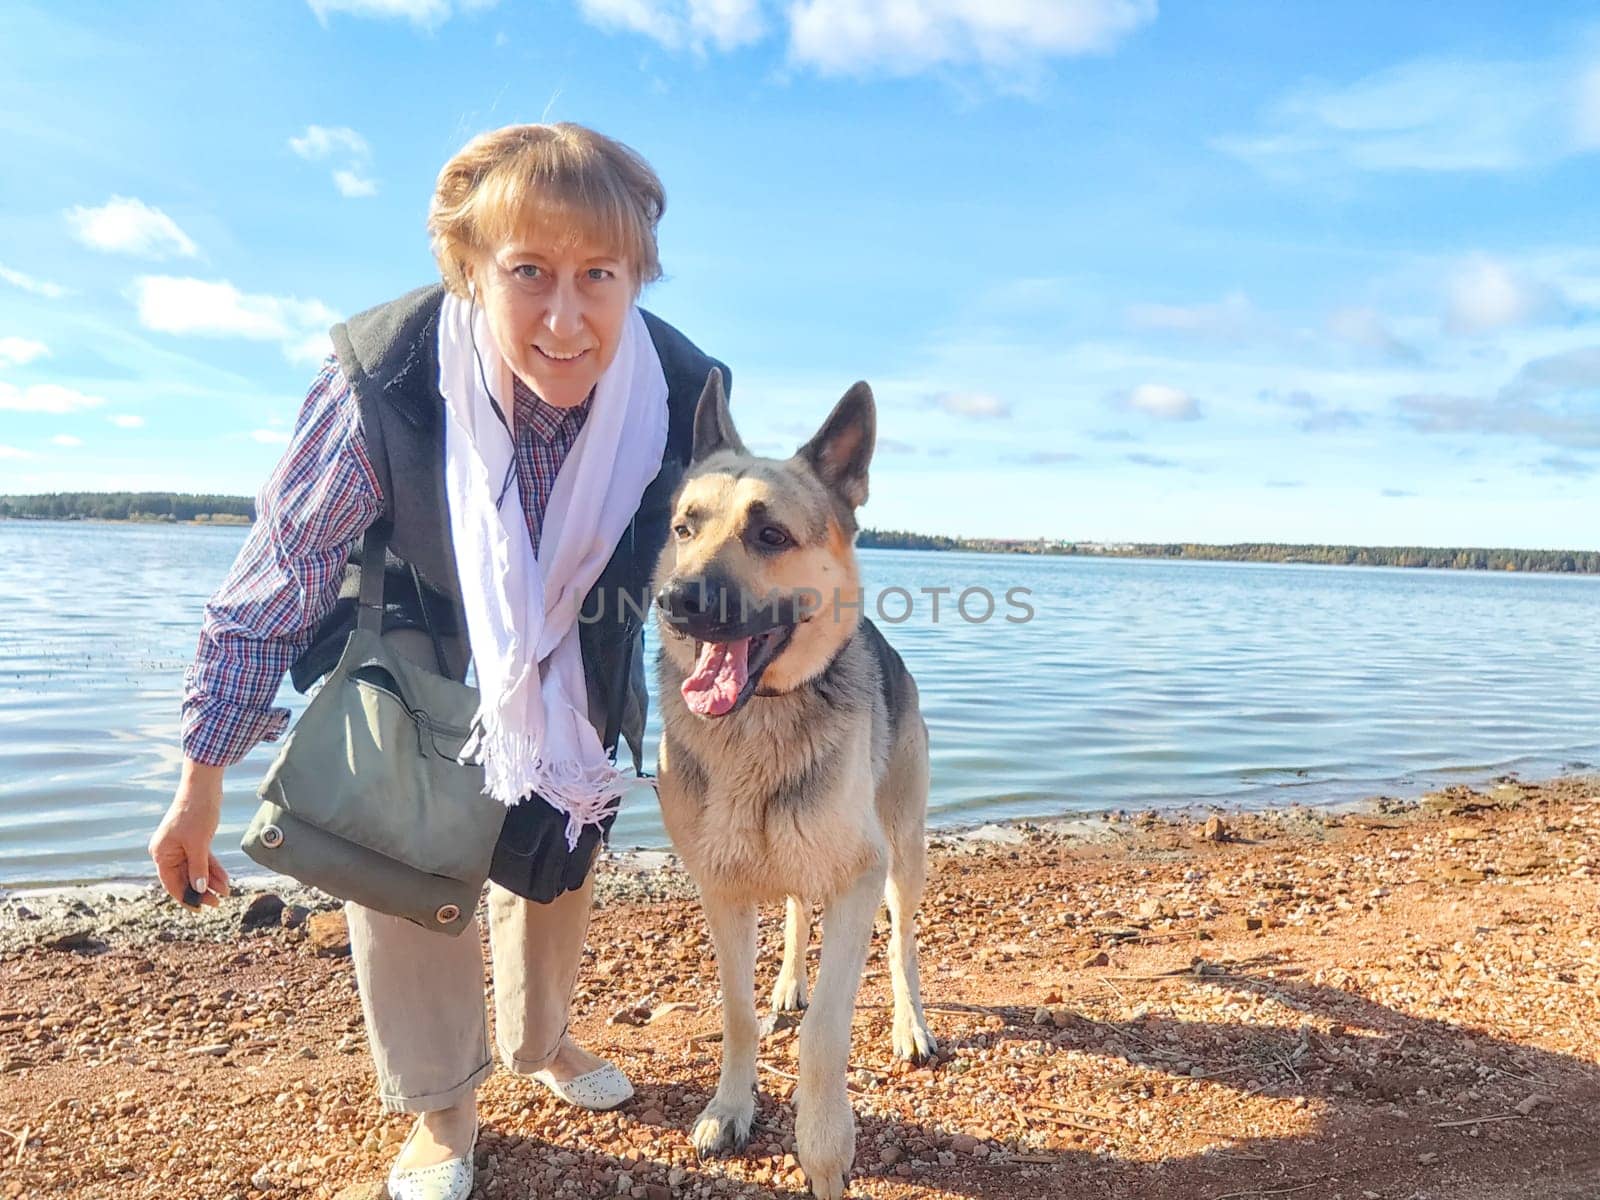 Adult girl with shepherd dog taking selfie near water of lake or river. Middle aged woman and big pet on nature. Friendship, love, fun, hugs